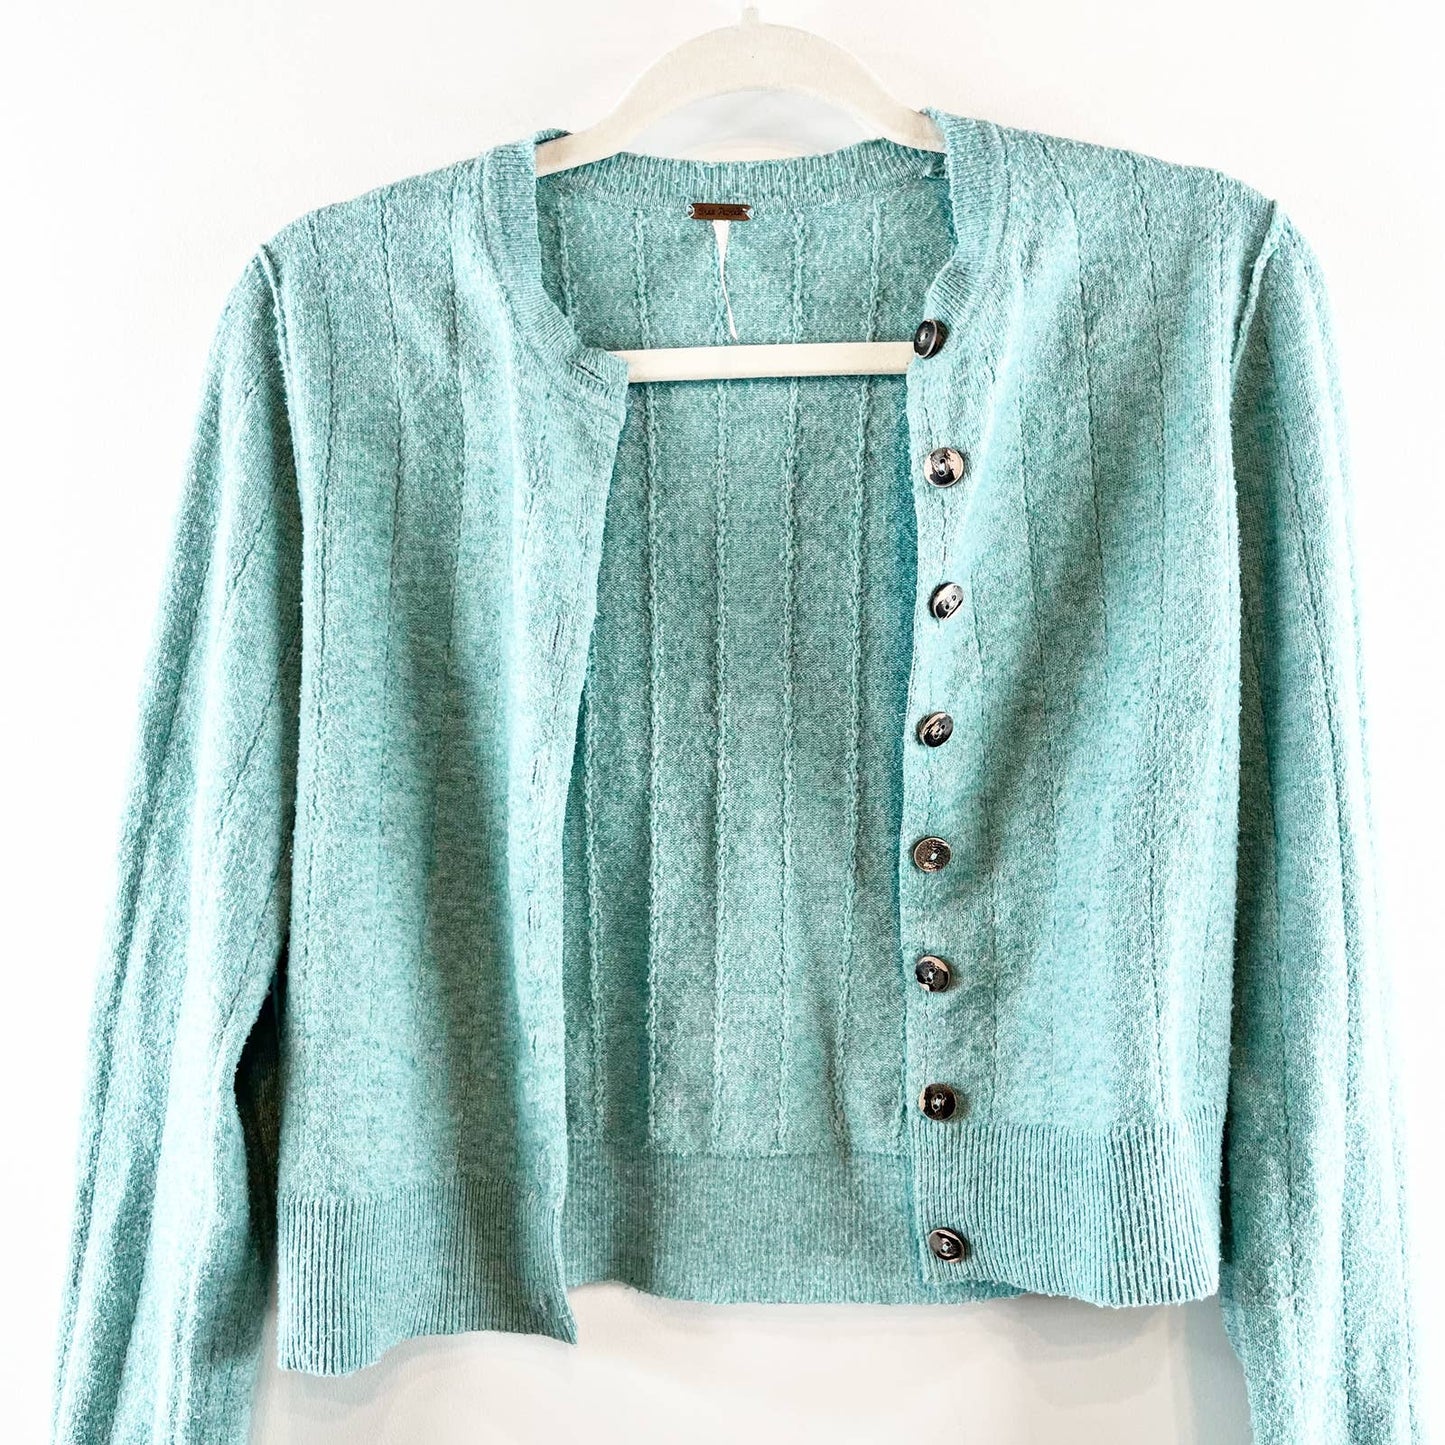 Free People Always With Me Cropped Cardigan Sweater Blue Green Small